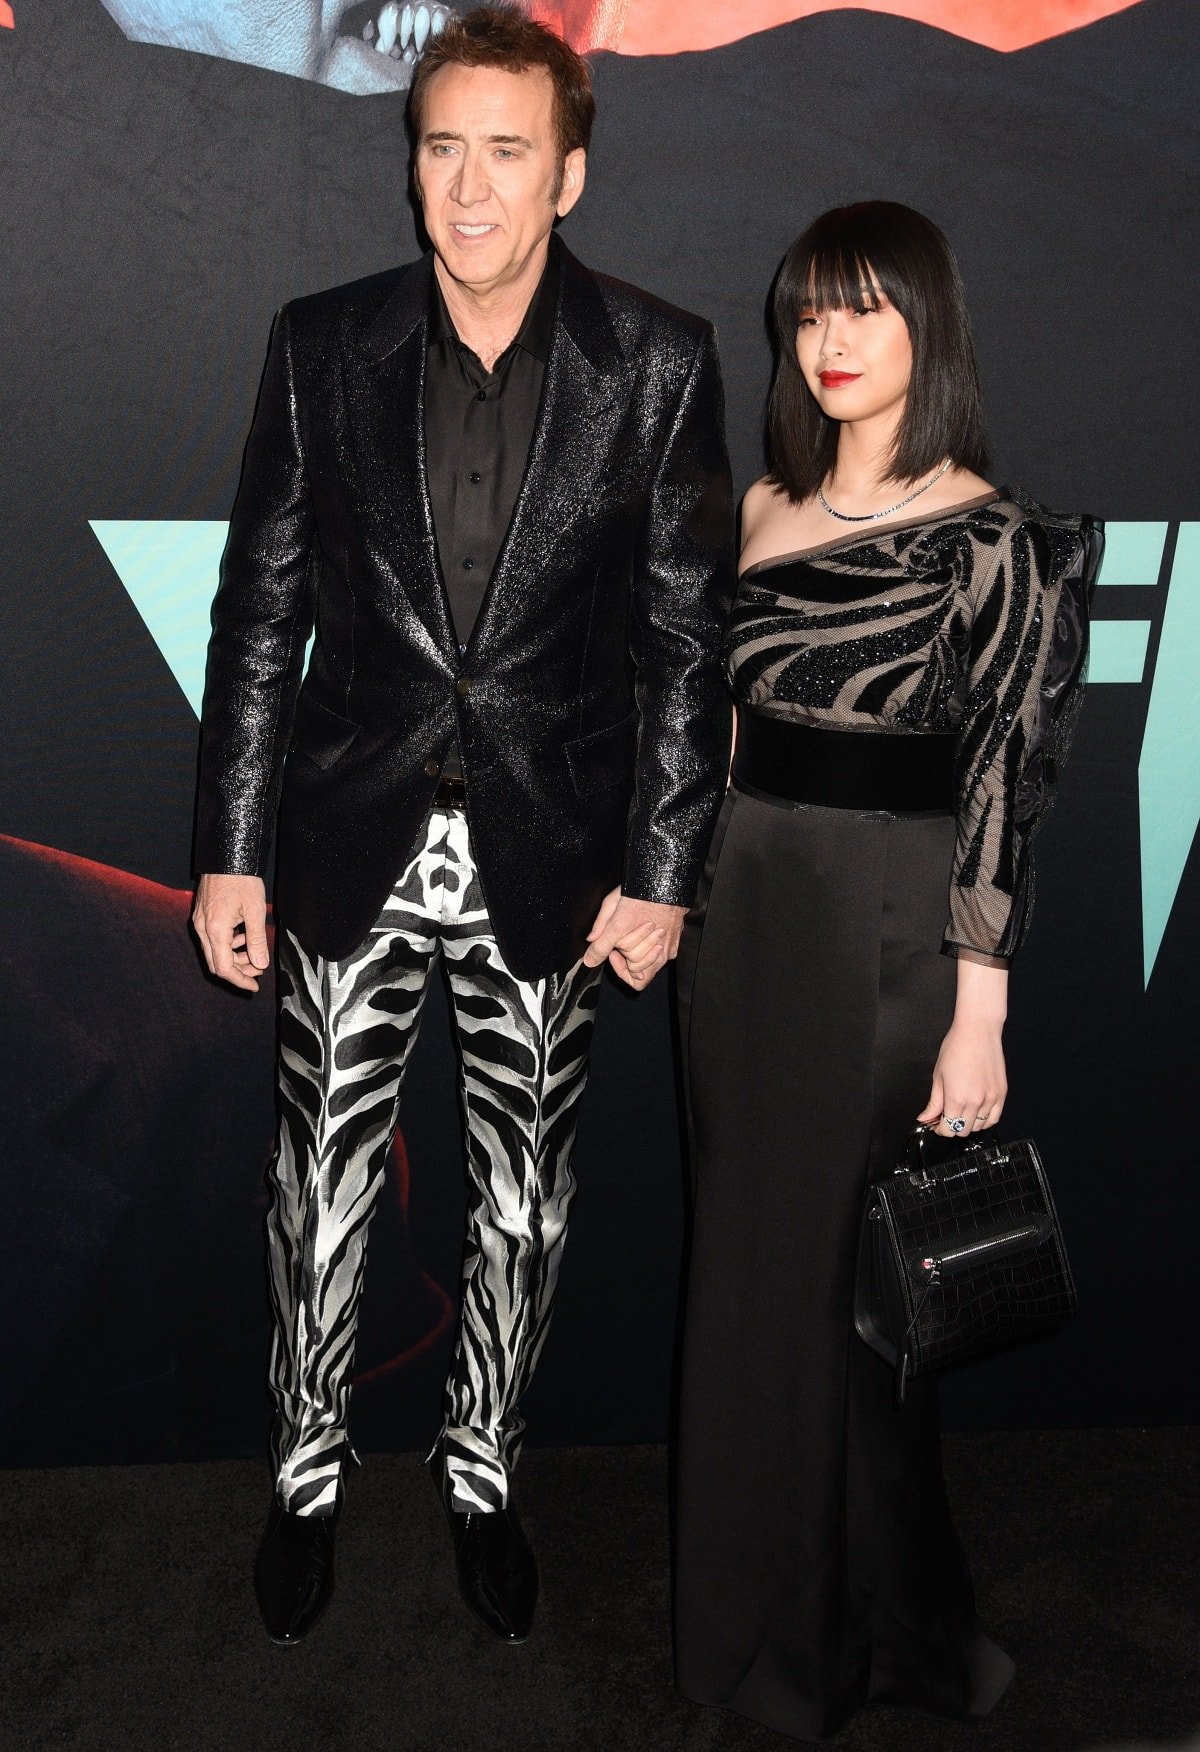 Nicolas Cage with his wife Riko Shibata at the premiere of Renfield in New York City